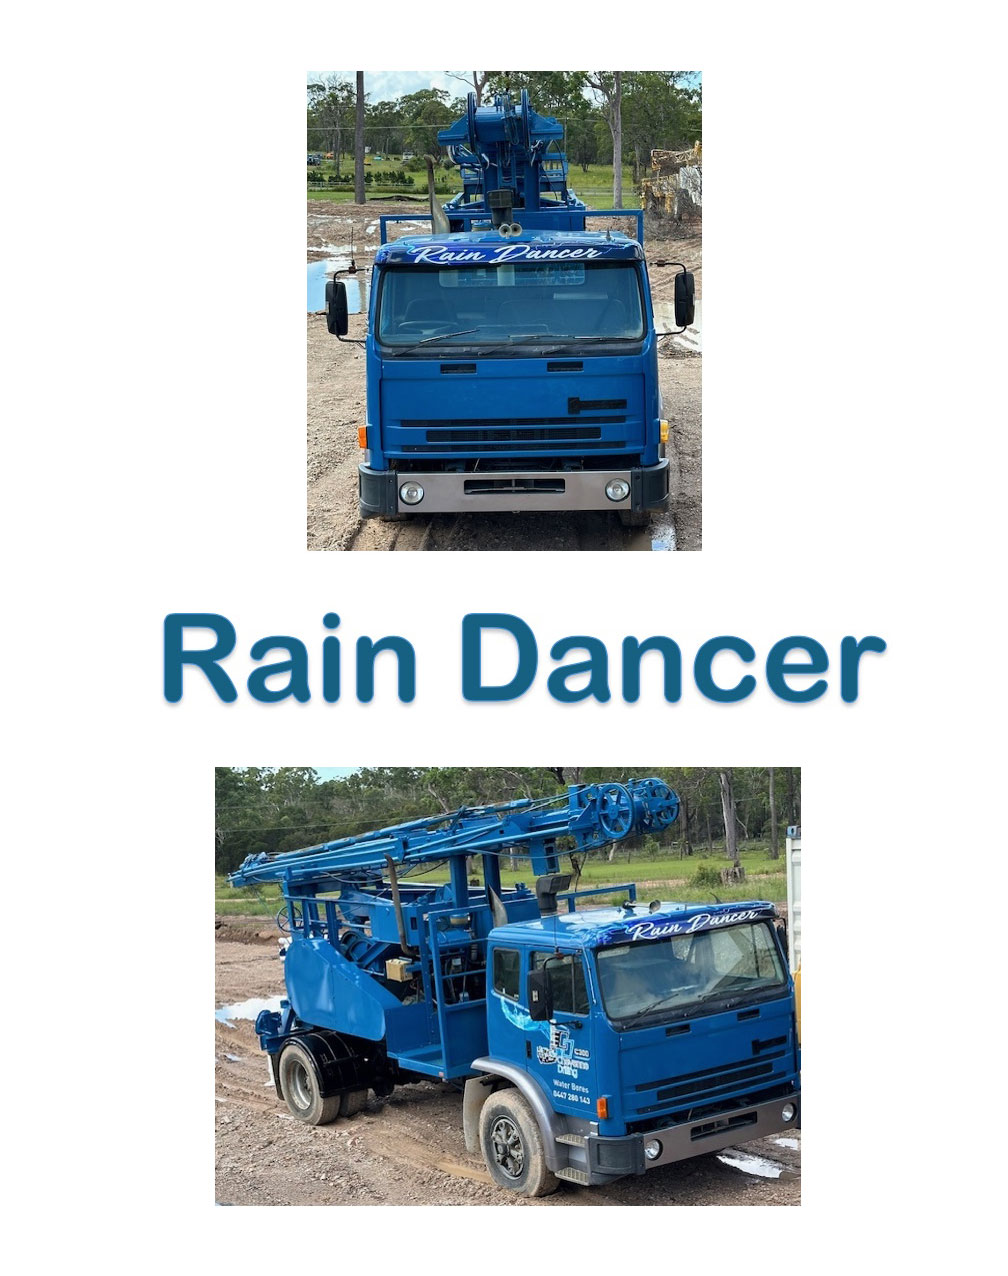 Two Images of A Blue Crane Truck Named "Rain Dancer," Displayed from Front and Side Angles, Parked in A Rugged Outdoor Setting — Bore Drilling in Bundaberg, QLD